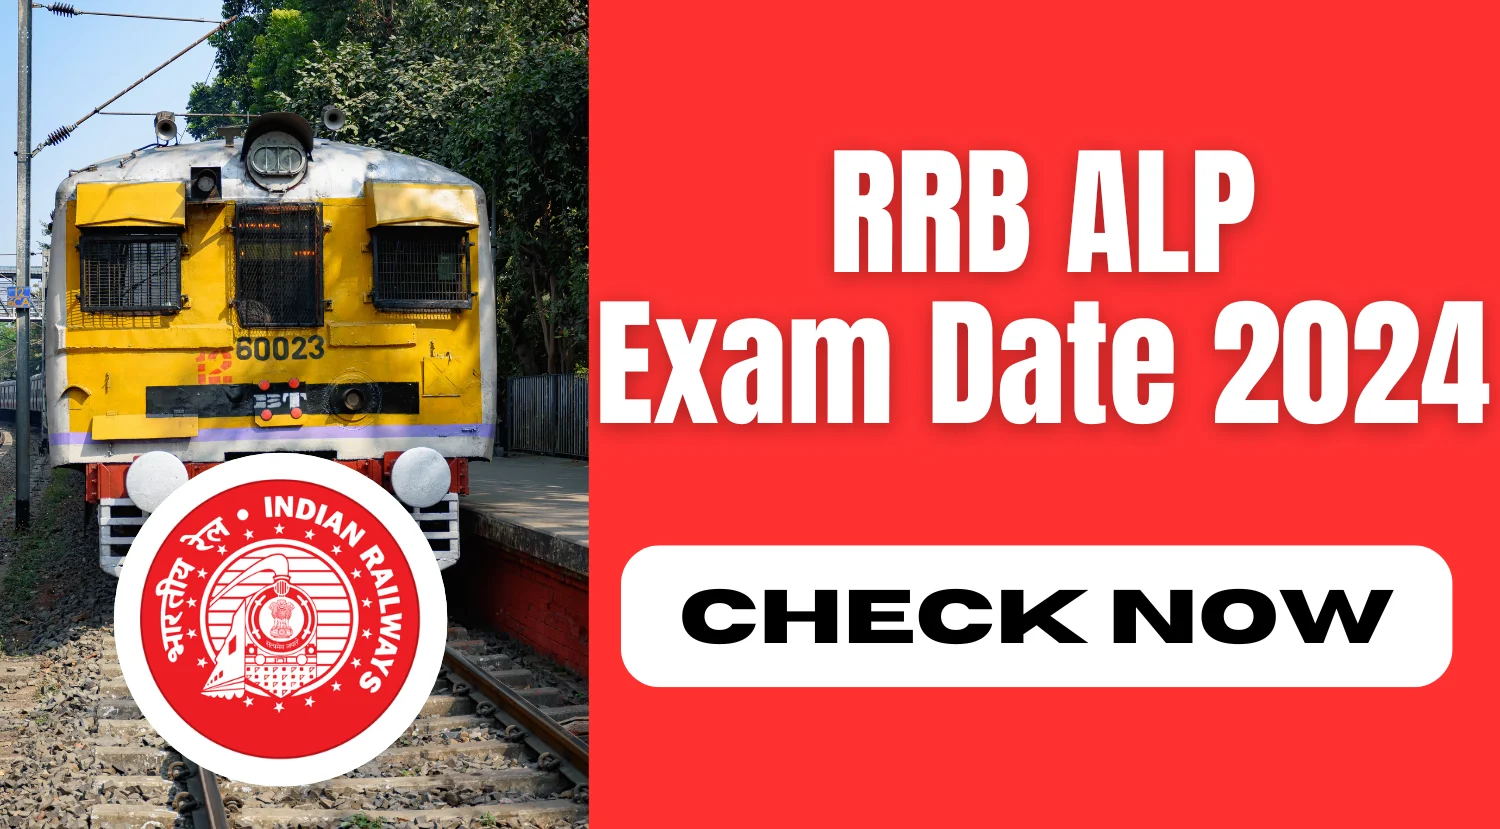 RRB ALP Exam Date: The Railway Recruitment Board (RRB) has issued a tentative schedule for the RRB Assistant Loco Pilot (ALP) Exam 2024,